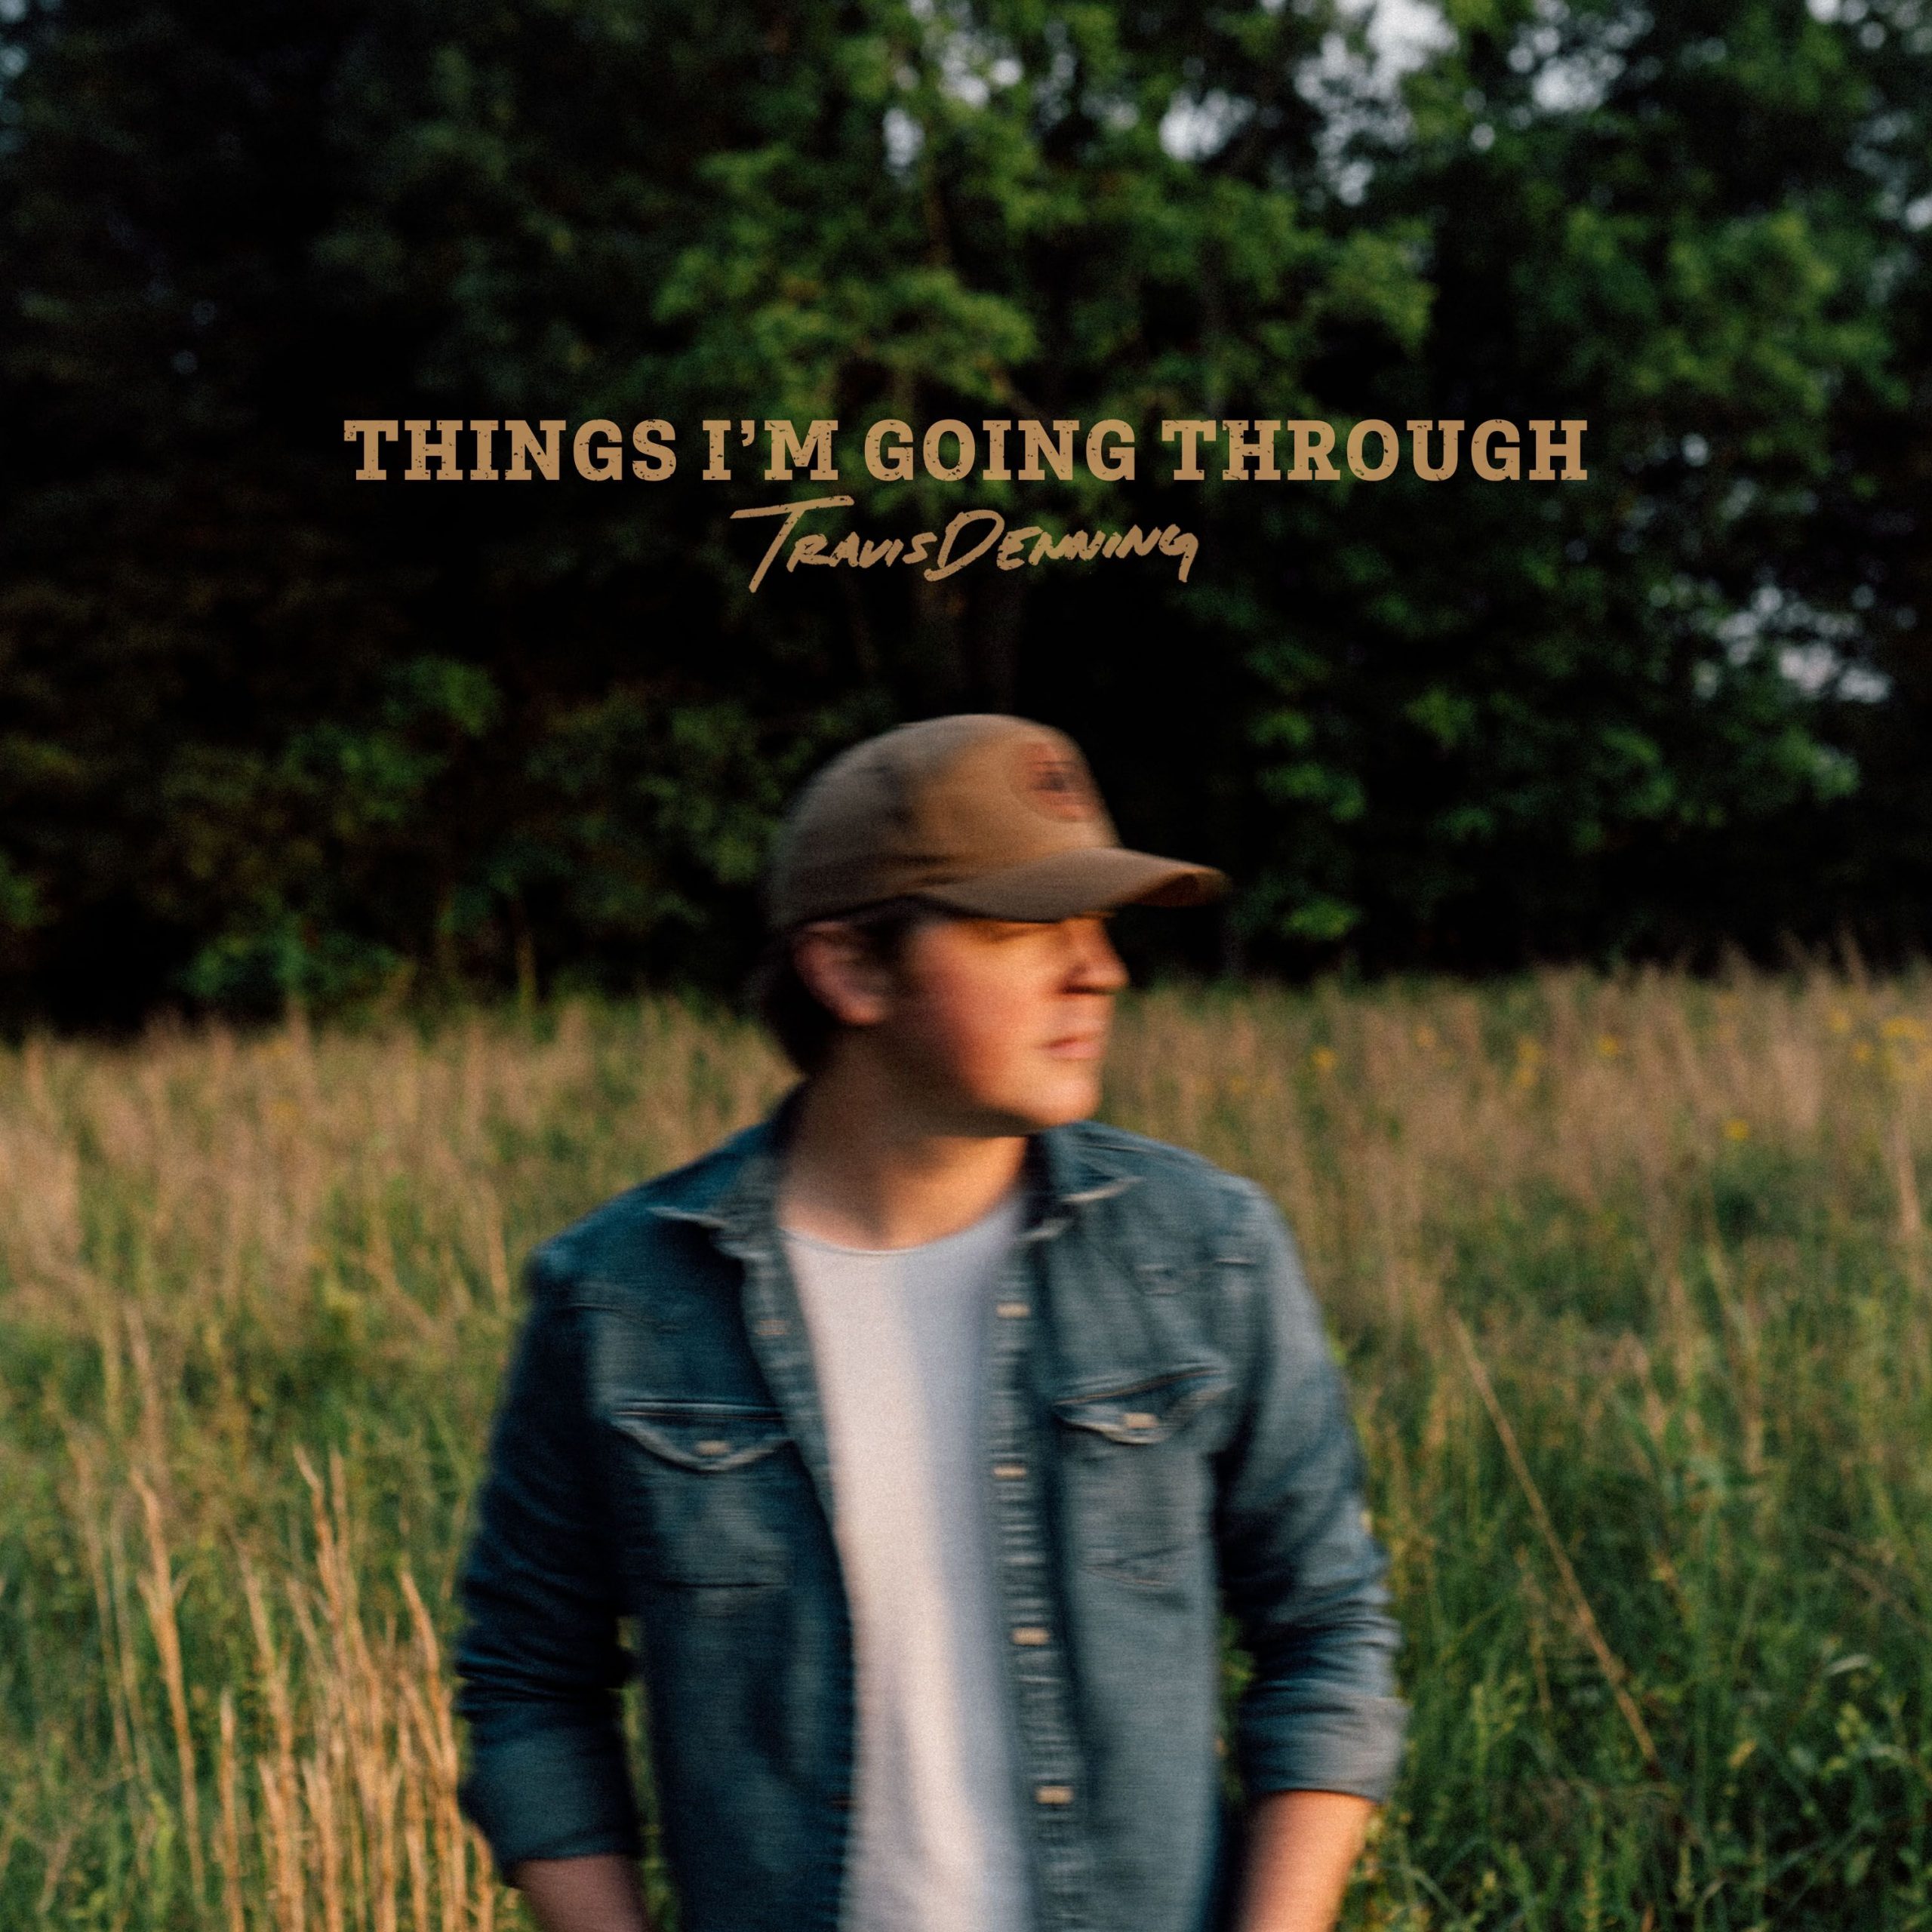 TRAVIS DENNING RELEASES NEW SONG “THINGS I’M GOING THROUGH”